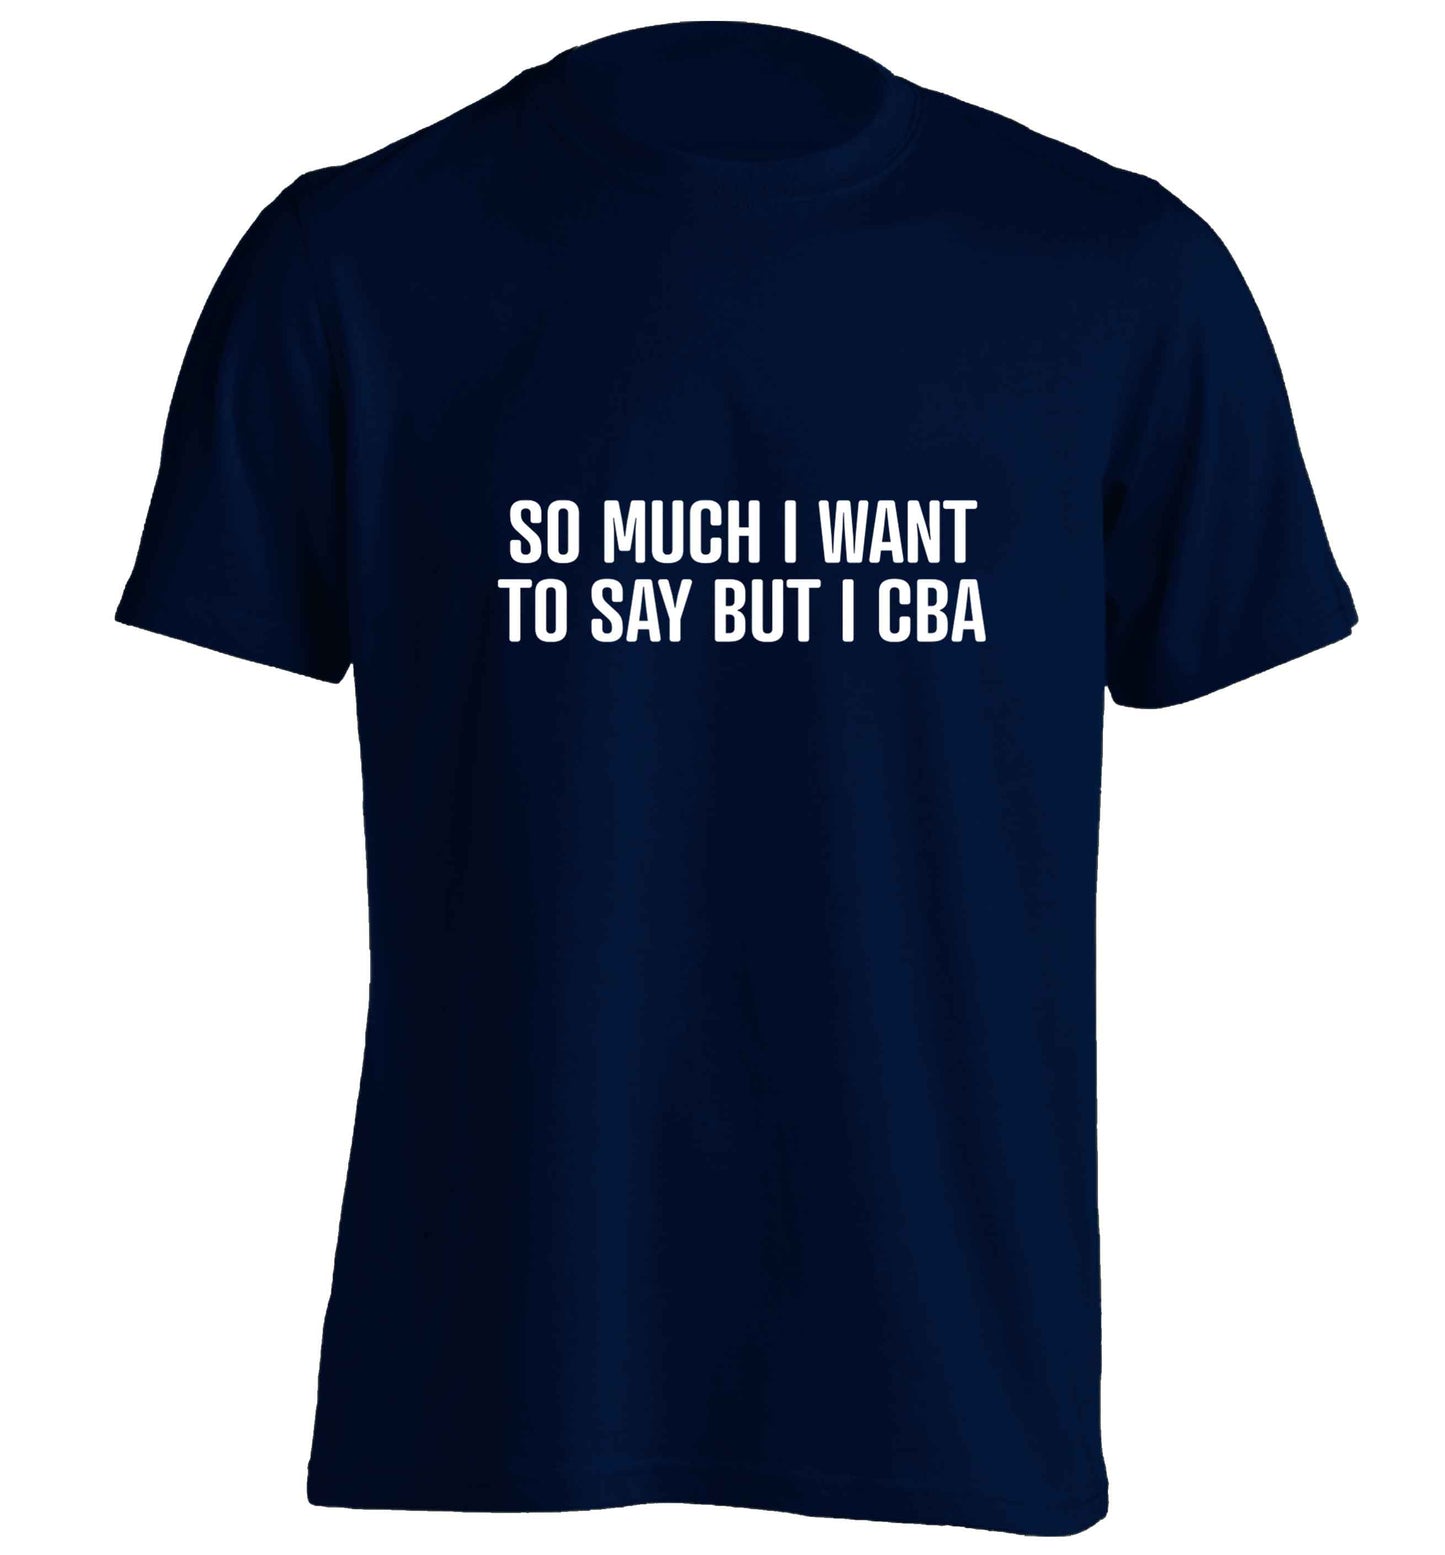 So much I want to say I cba  adults unisex navy Tshirt 2XL